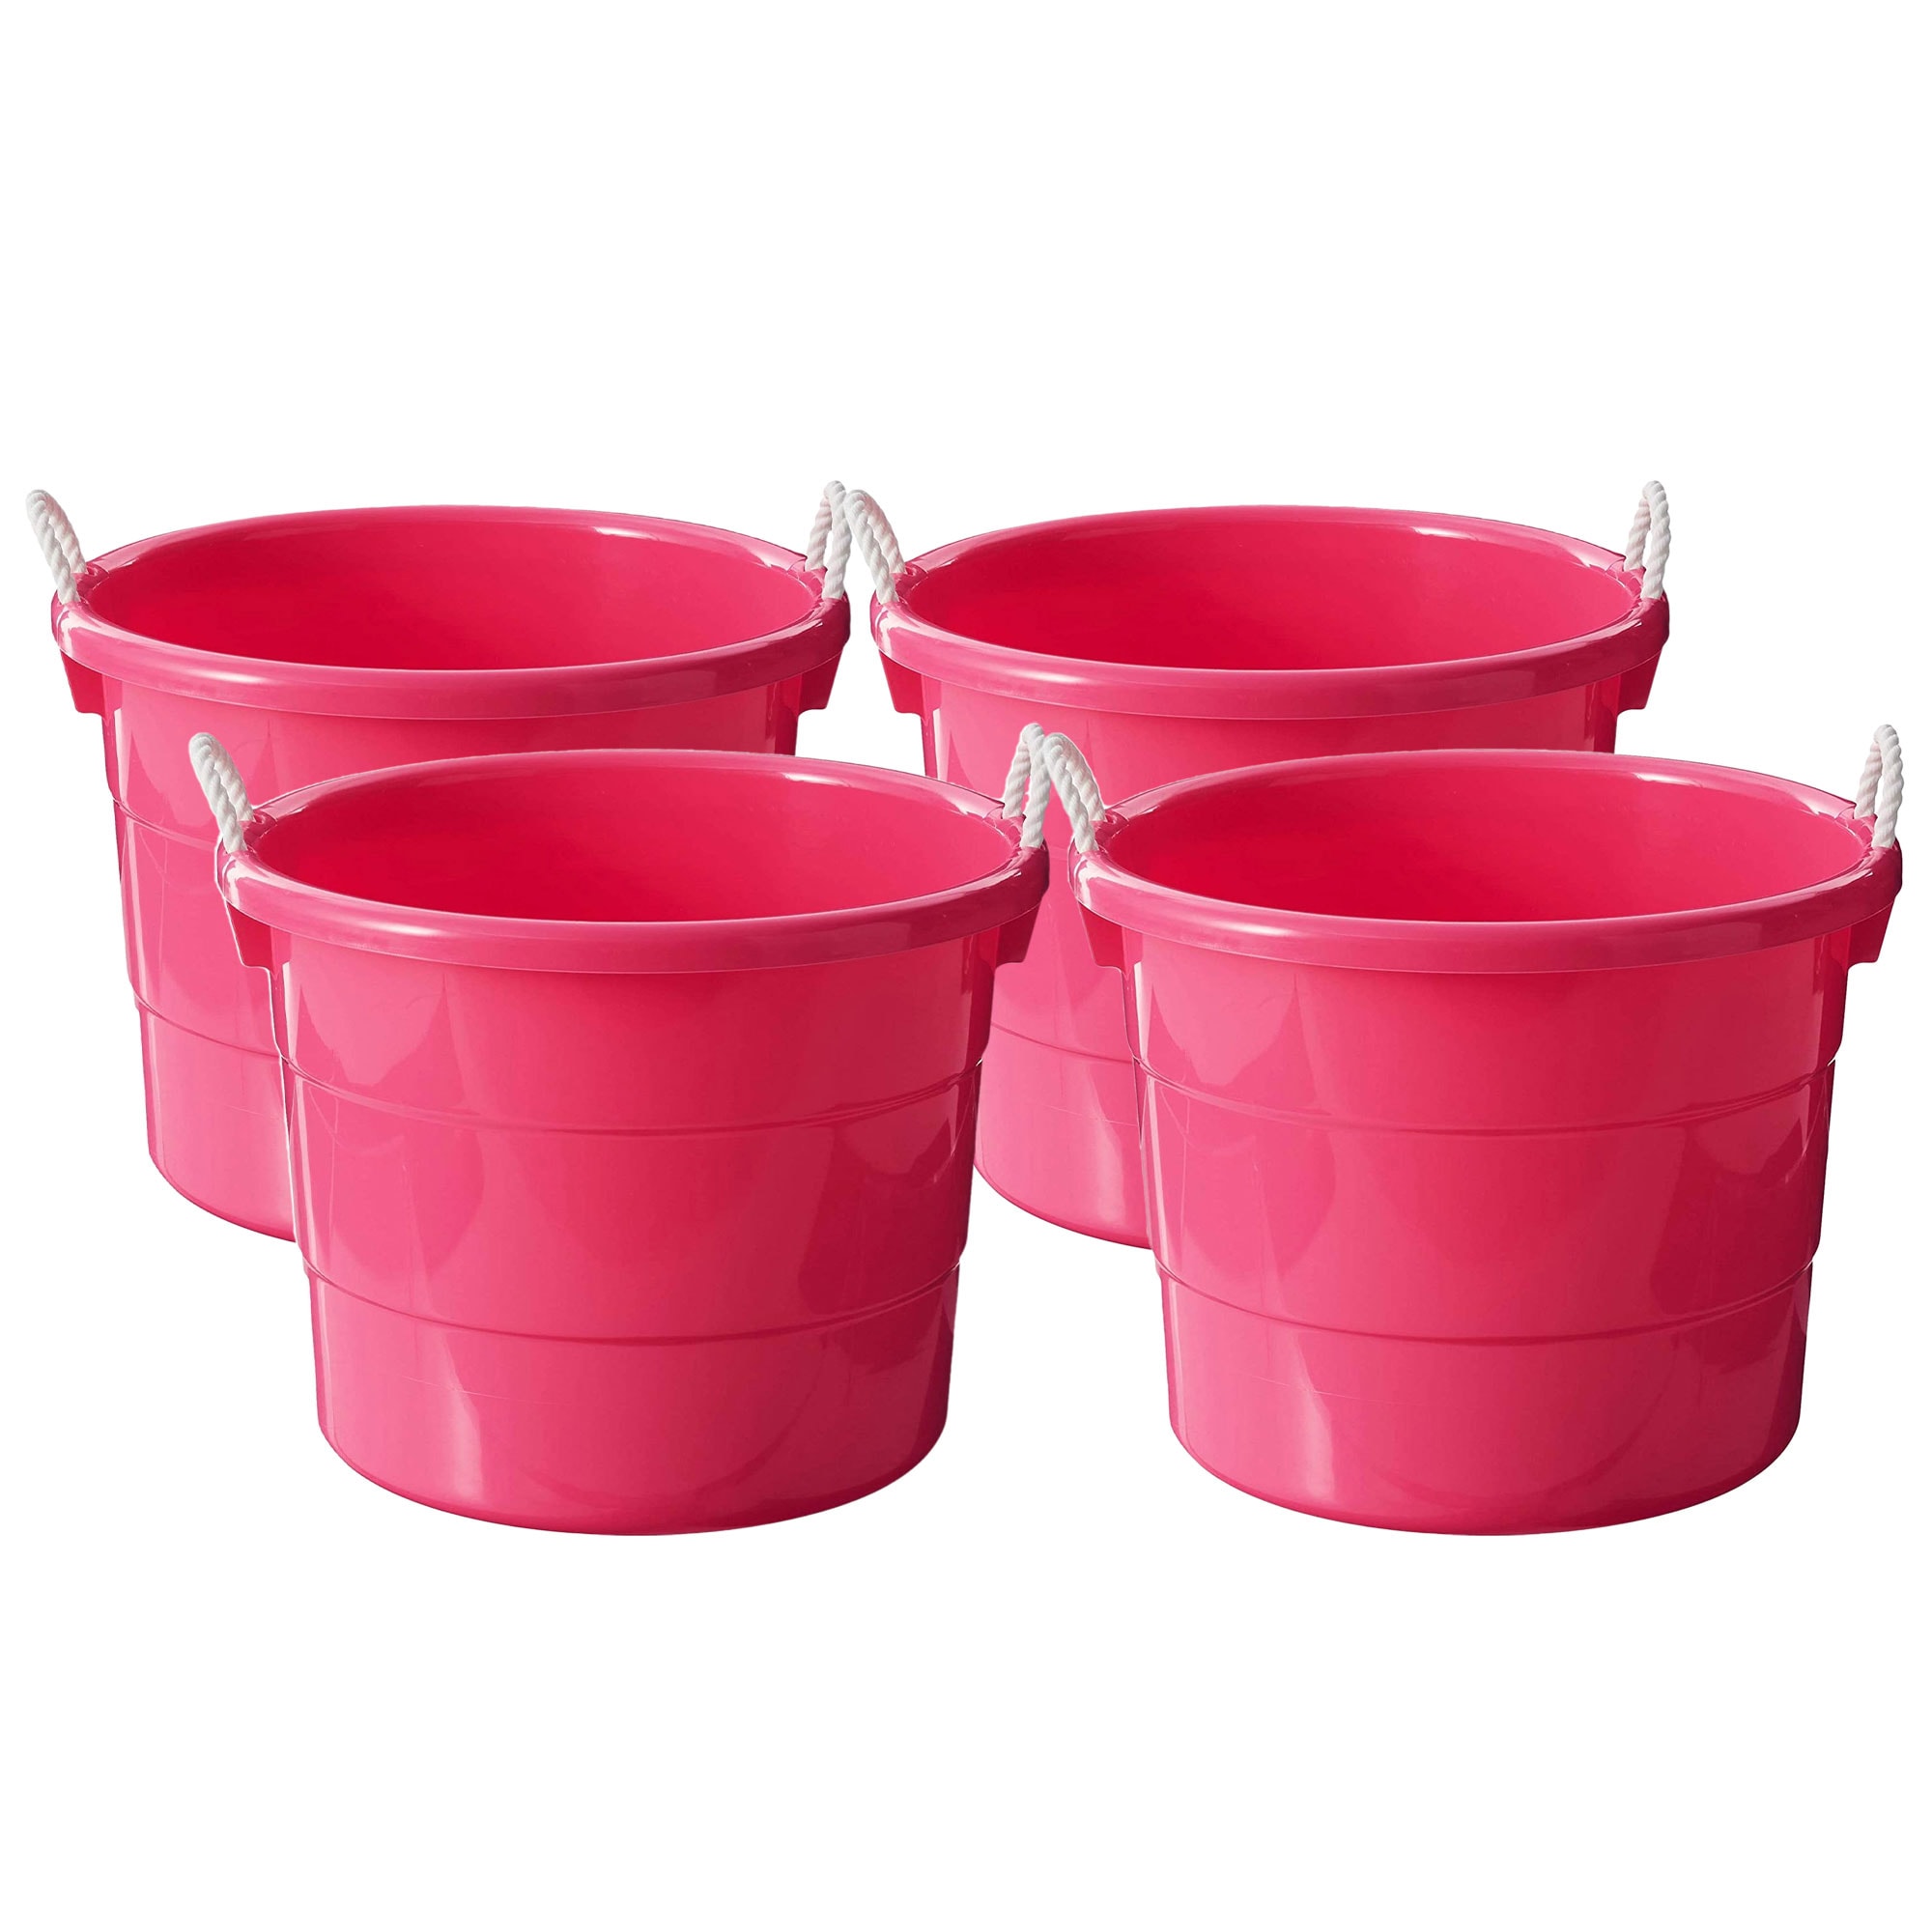 Homz 14 Gallon Plastic Storage Container with Lid, Clear and Pink